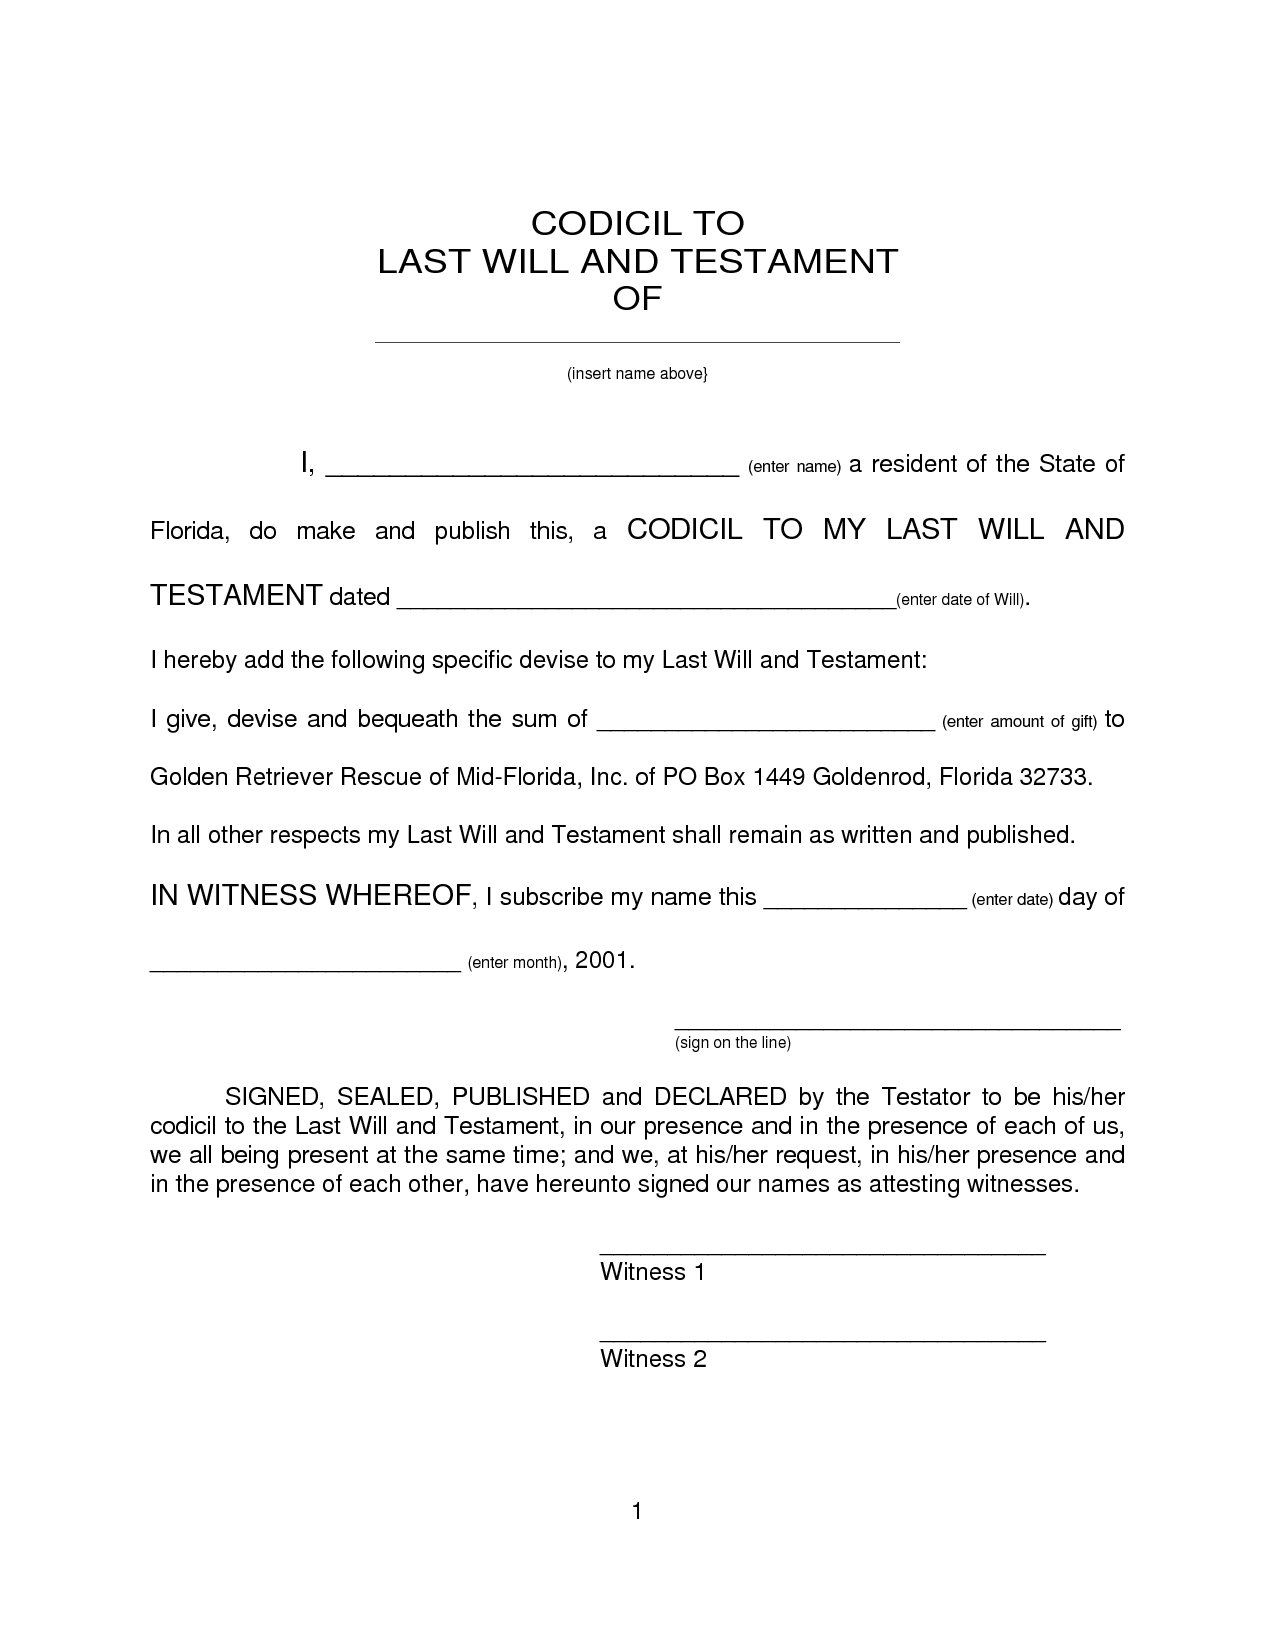 Last Will And Testament Sample Form - Free Printable Documents